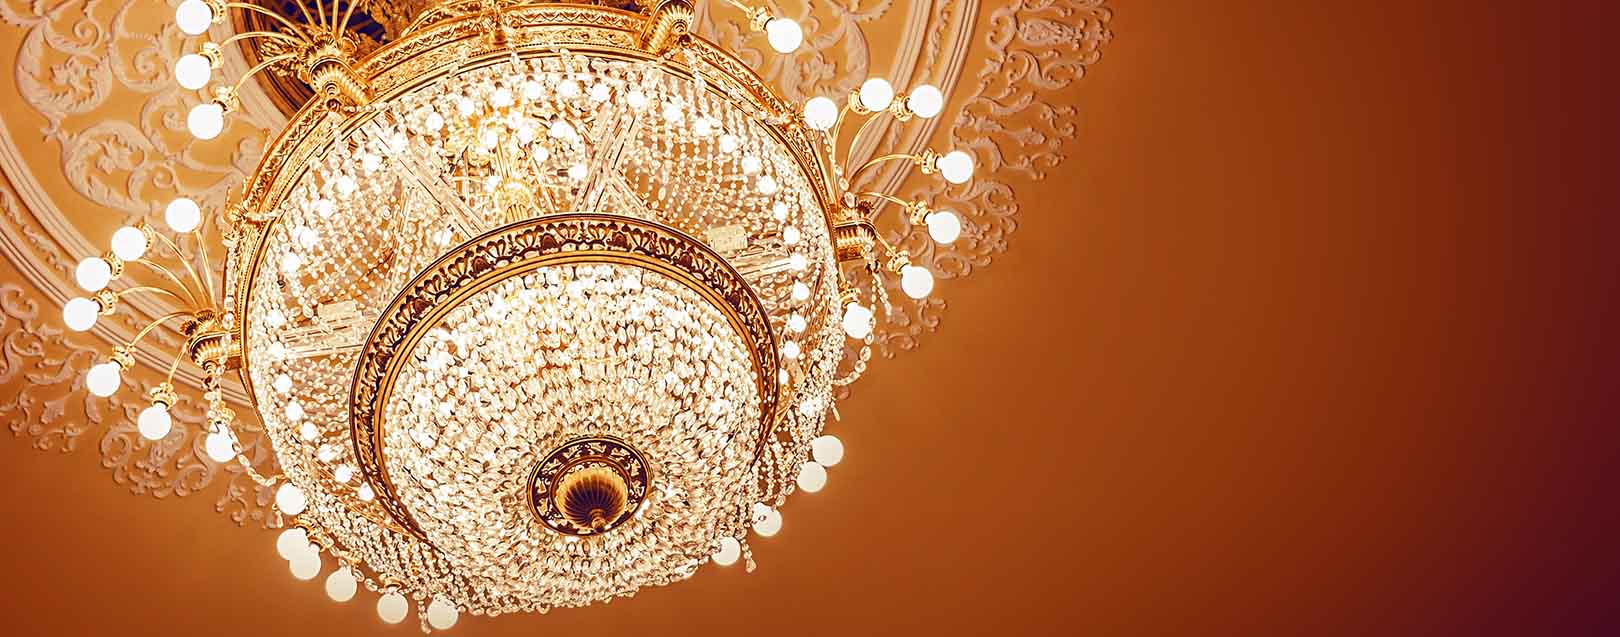 Chandelier - All that glitters can be (worth) gold! March 2018 issue